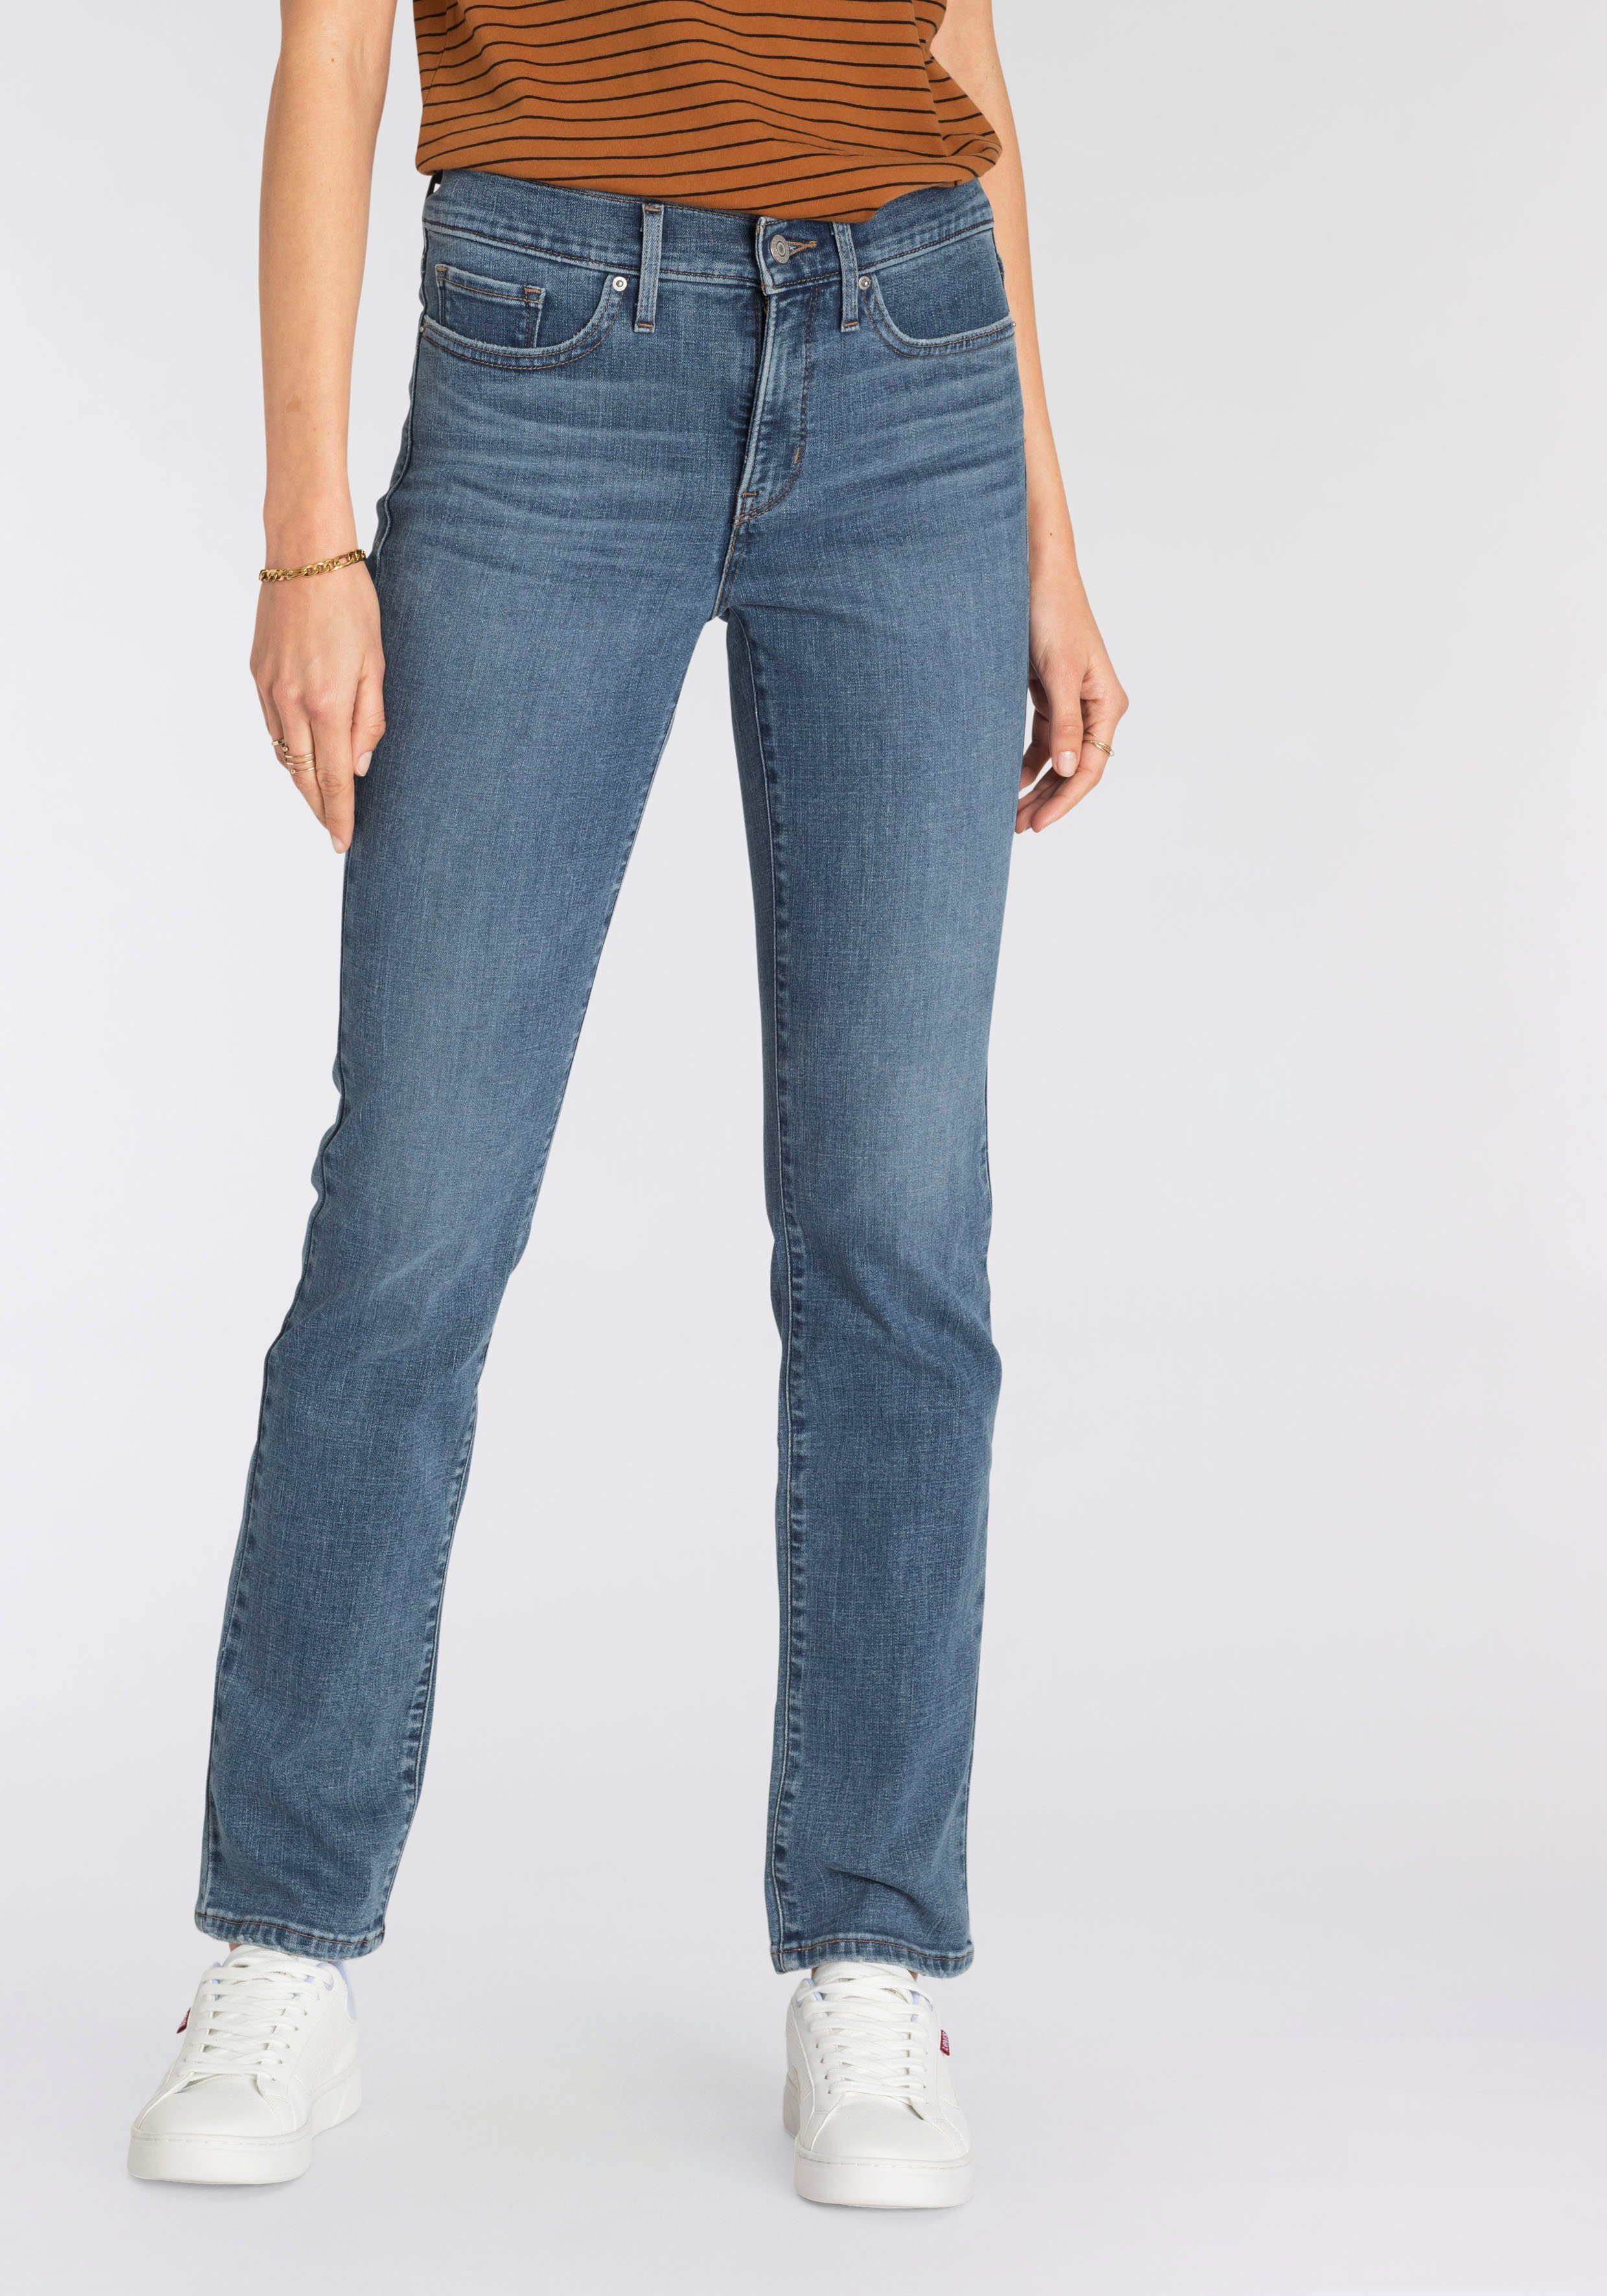 Levi's® Gerade Jeans »314 Shaping Straight« kaufen | OTTO